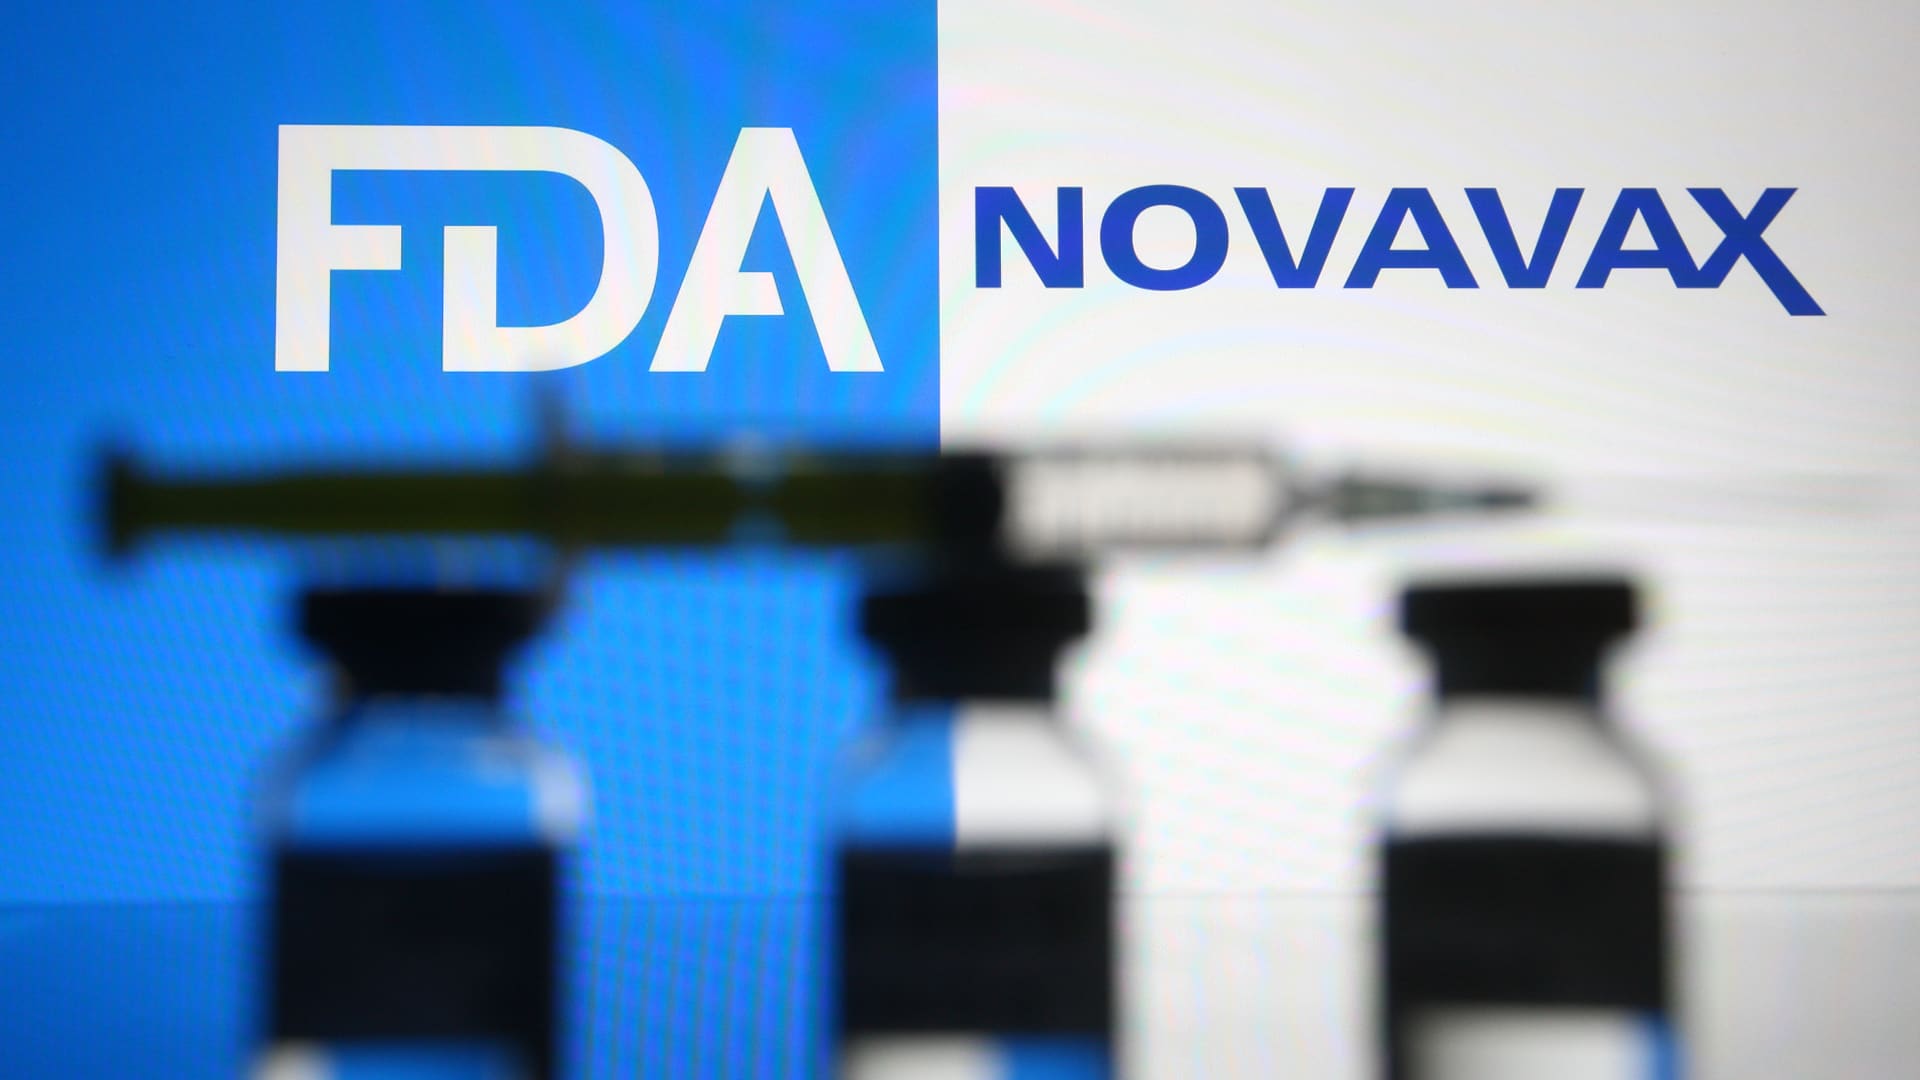 Novavax Covid vaccine clears key step on path to FDA authorization after committ..